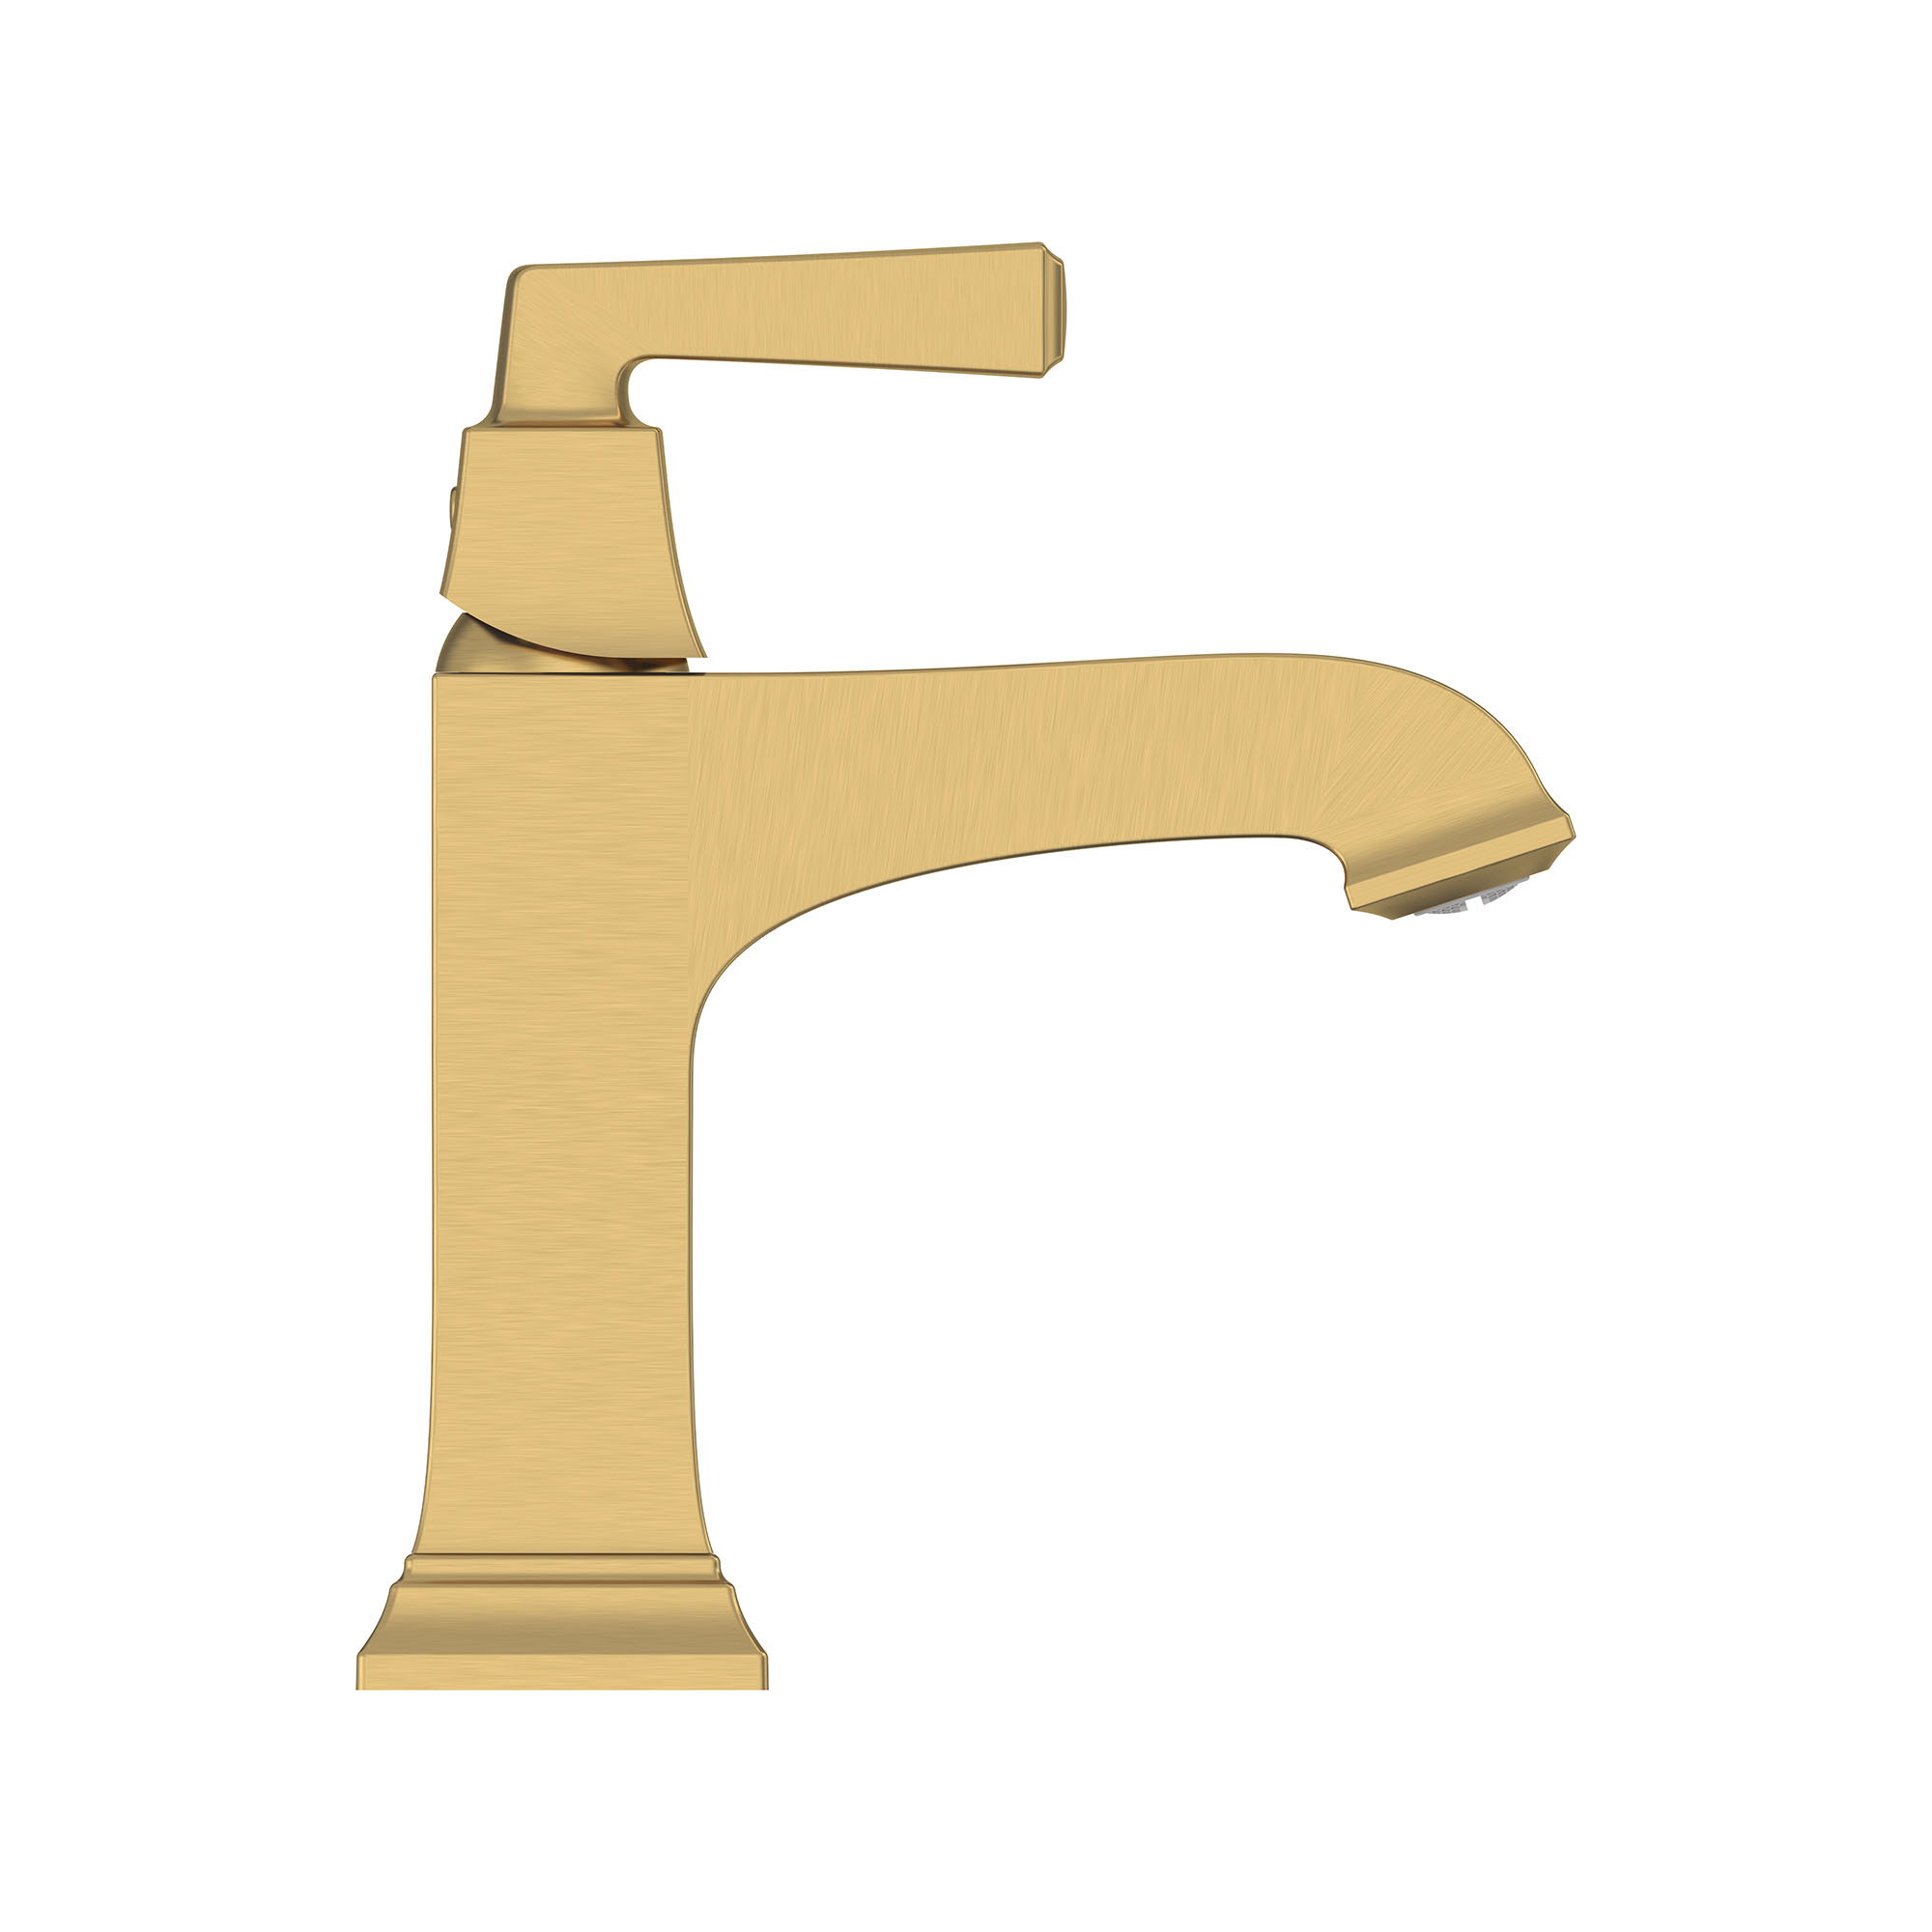 Town Square™ S Single Hole Single-Handle Bathroom Faucet 1.2 gpm/4.5 L/min With Lever Handle